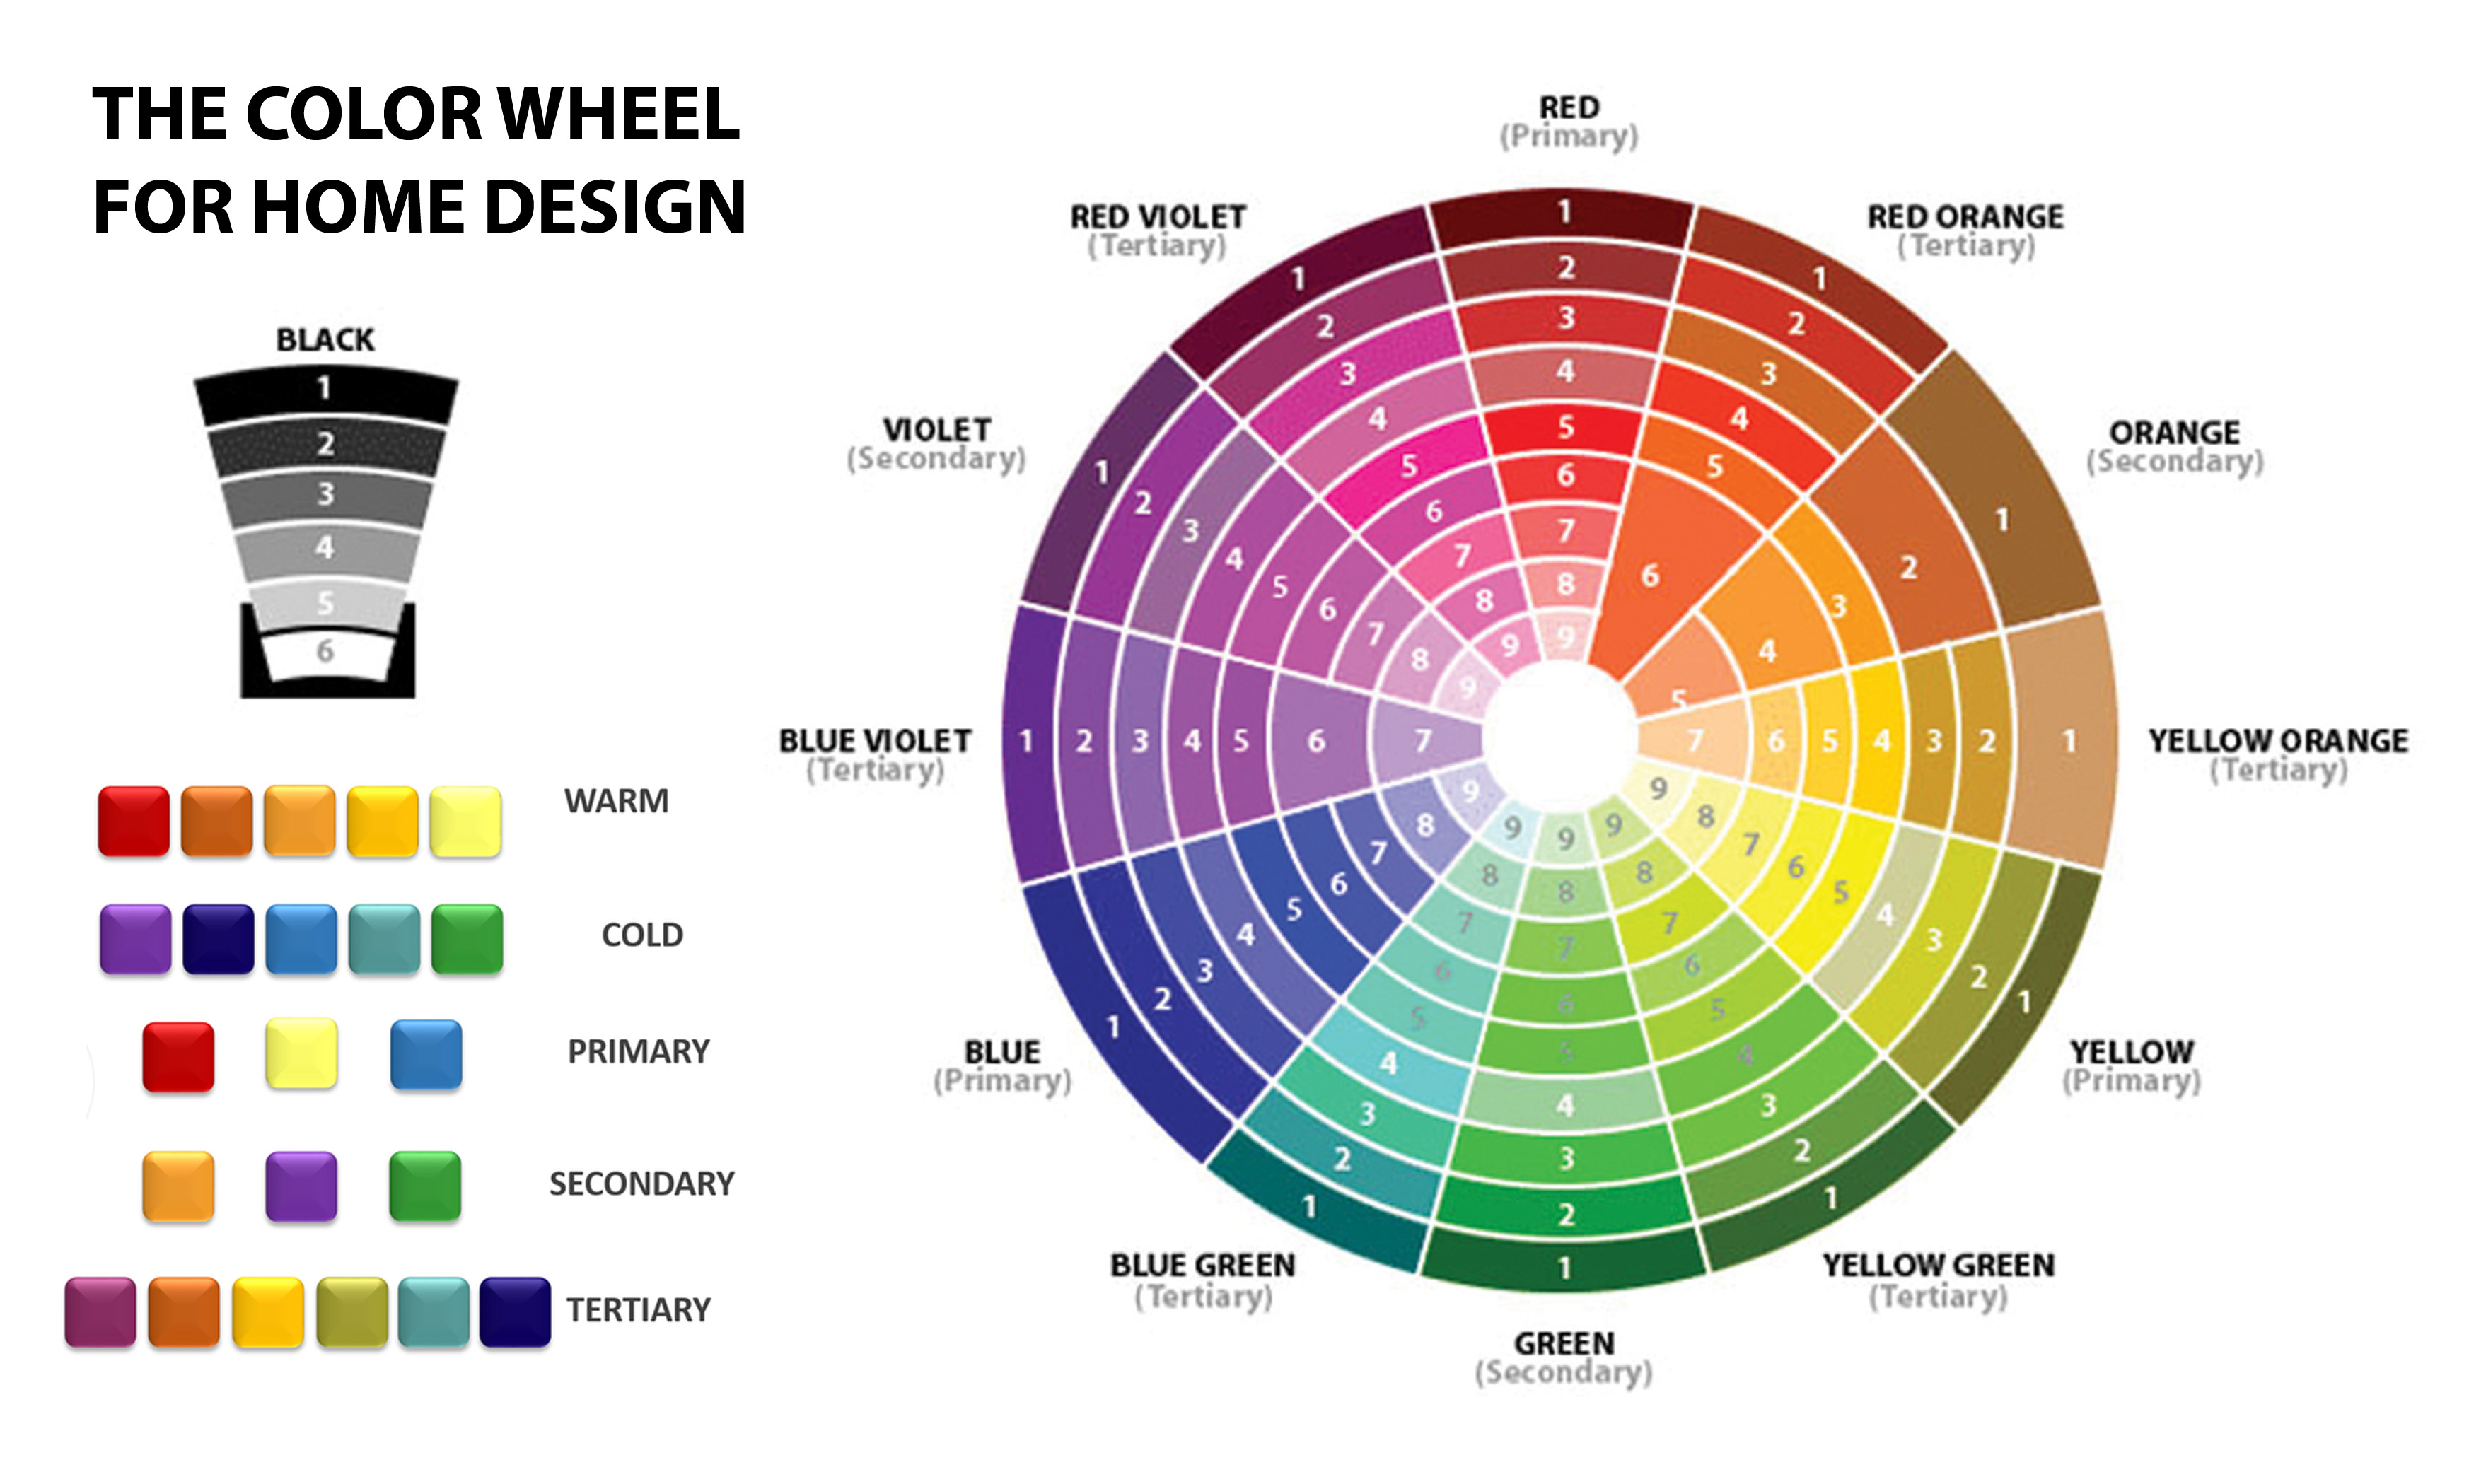 How to Understanding Color Wheel for Home Design